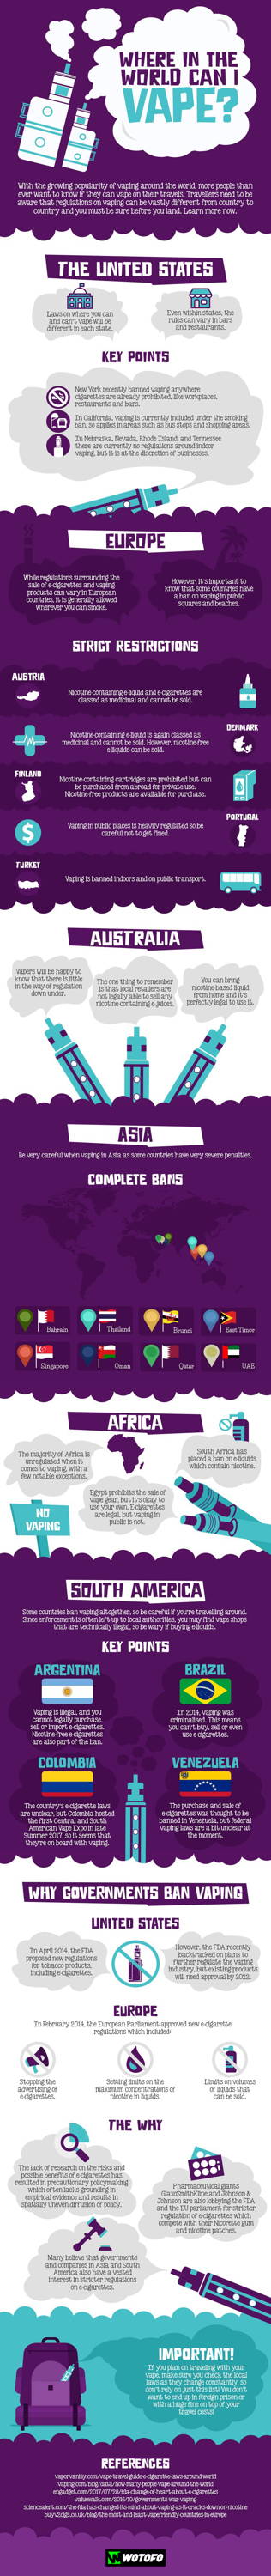 Where in the world can I vape WOTOFO Infographic